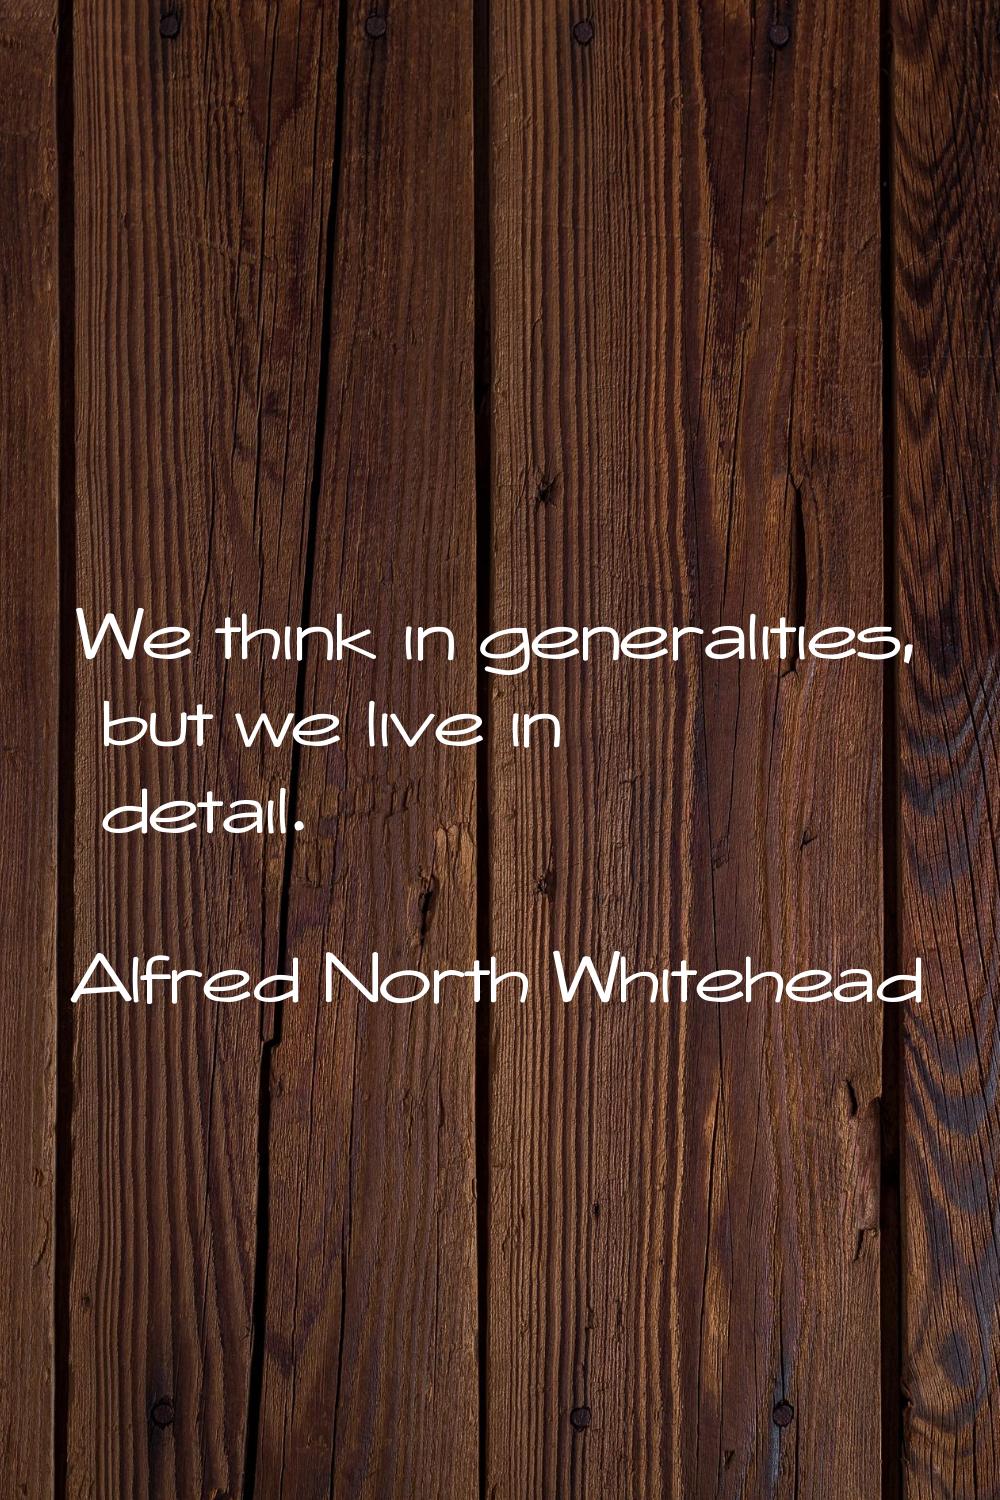 We think in generalities, but we live in detail.